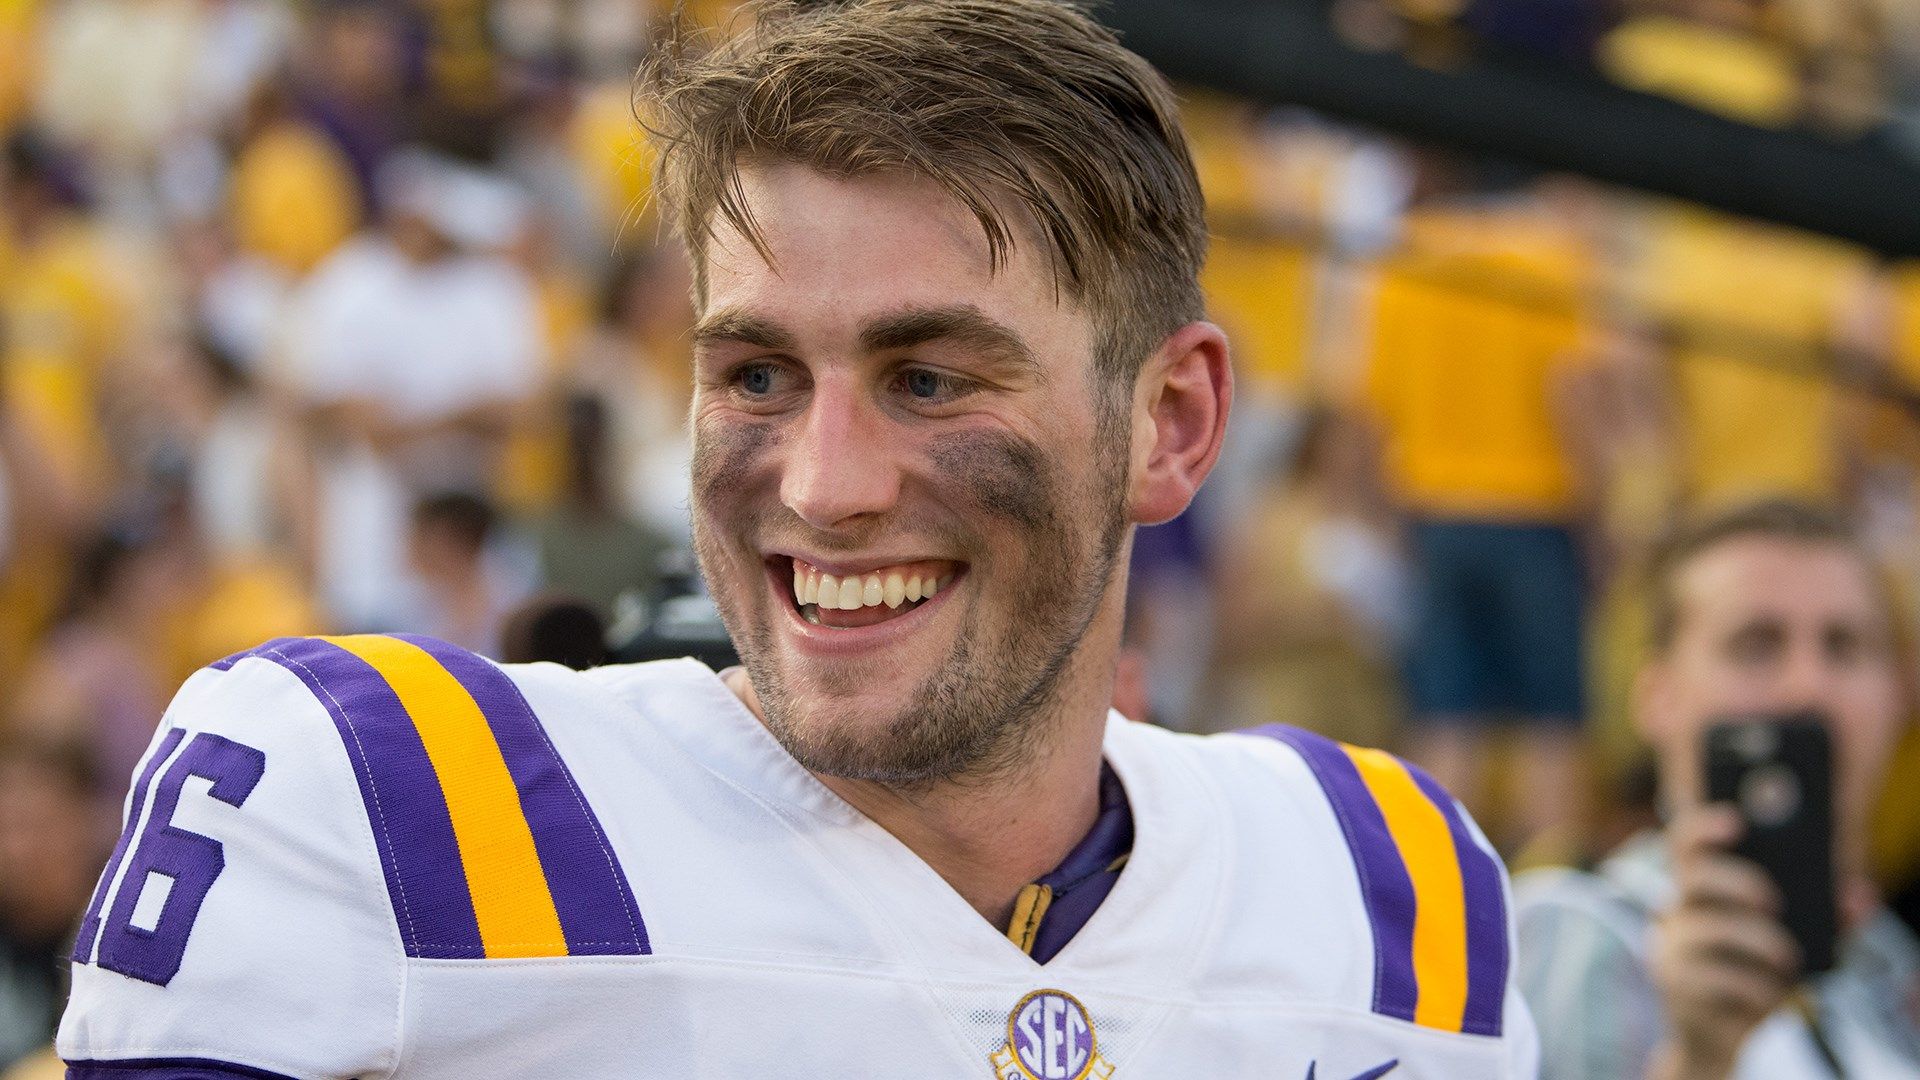 'Without LSU, I wouldn't be where I am' - QB Danny Etling still surviving  in the NFL